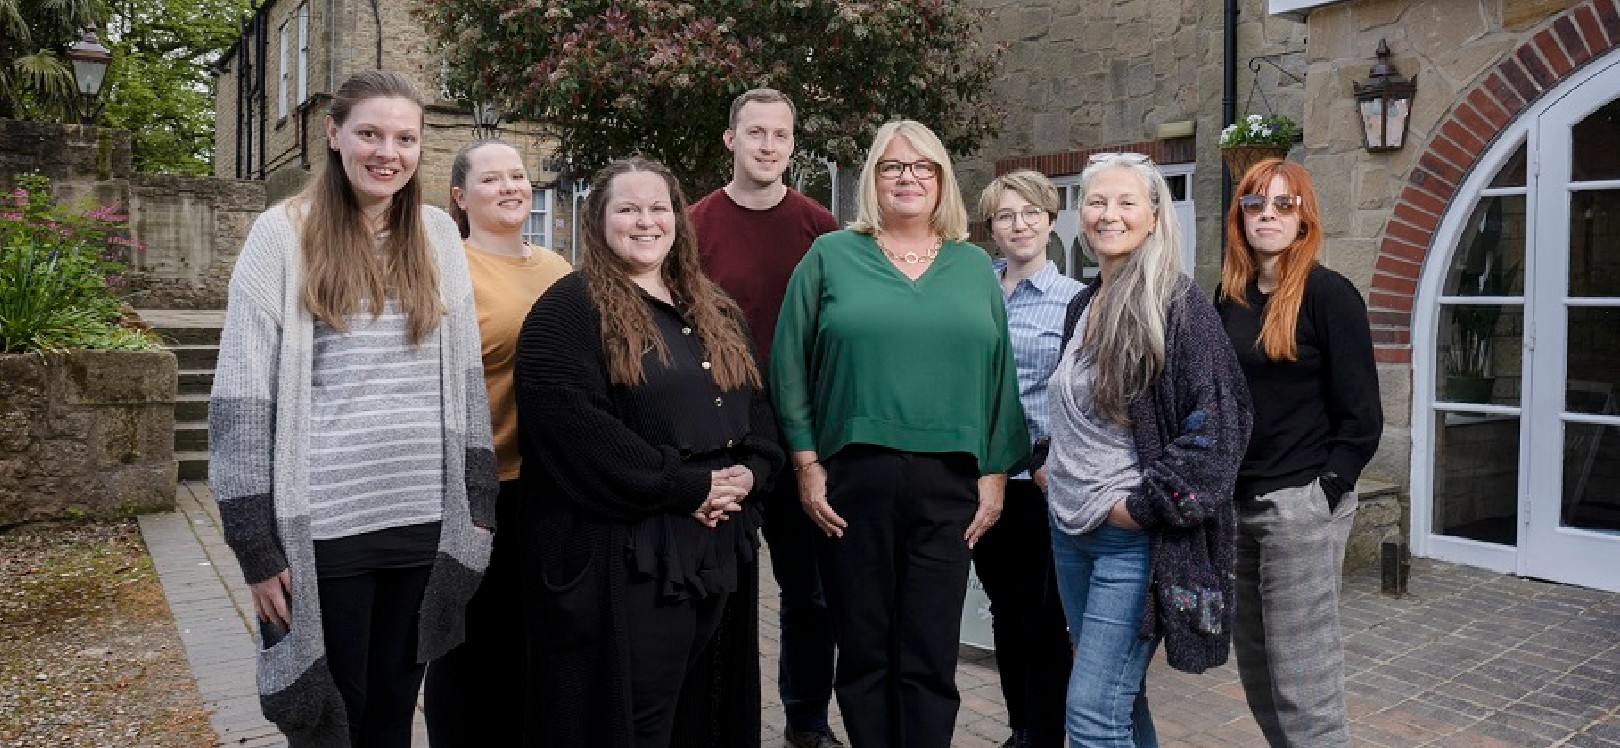 Course leader Susie Brindley, fourth from right, with representatives from tourism businesses who attended the Visit County Durham group travel training course